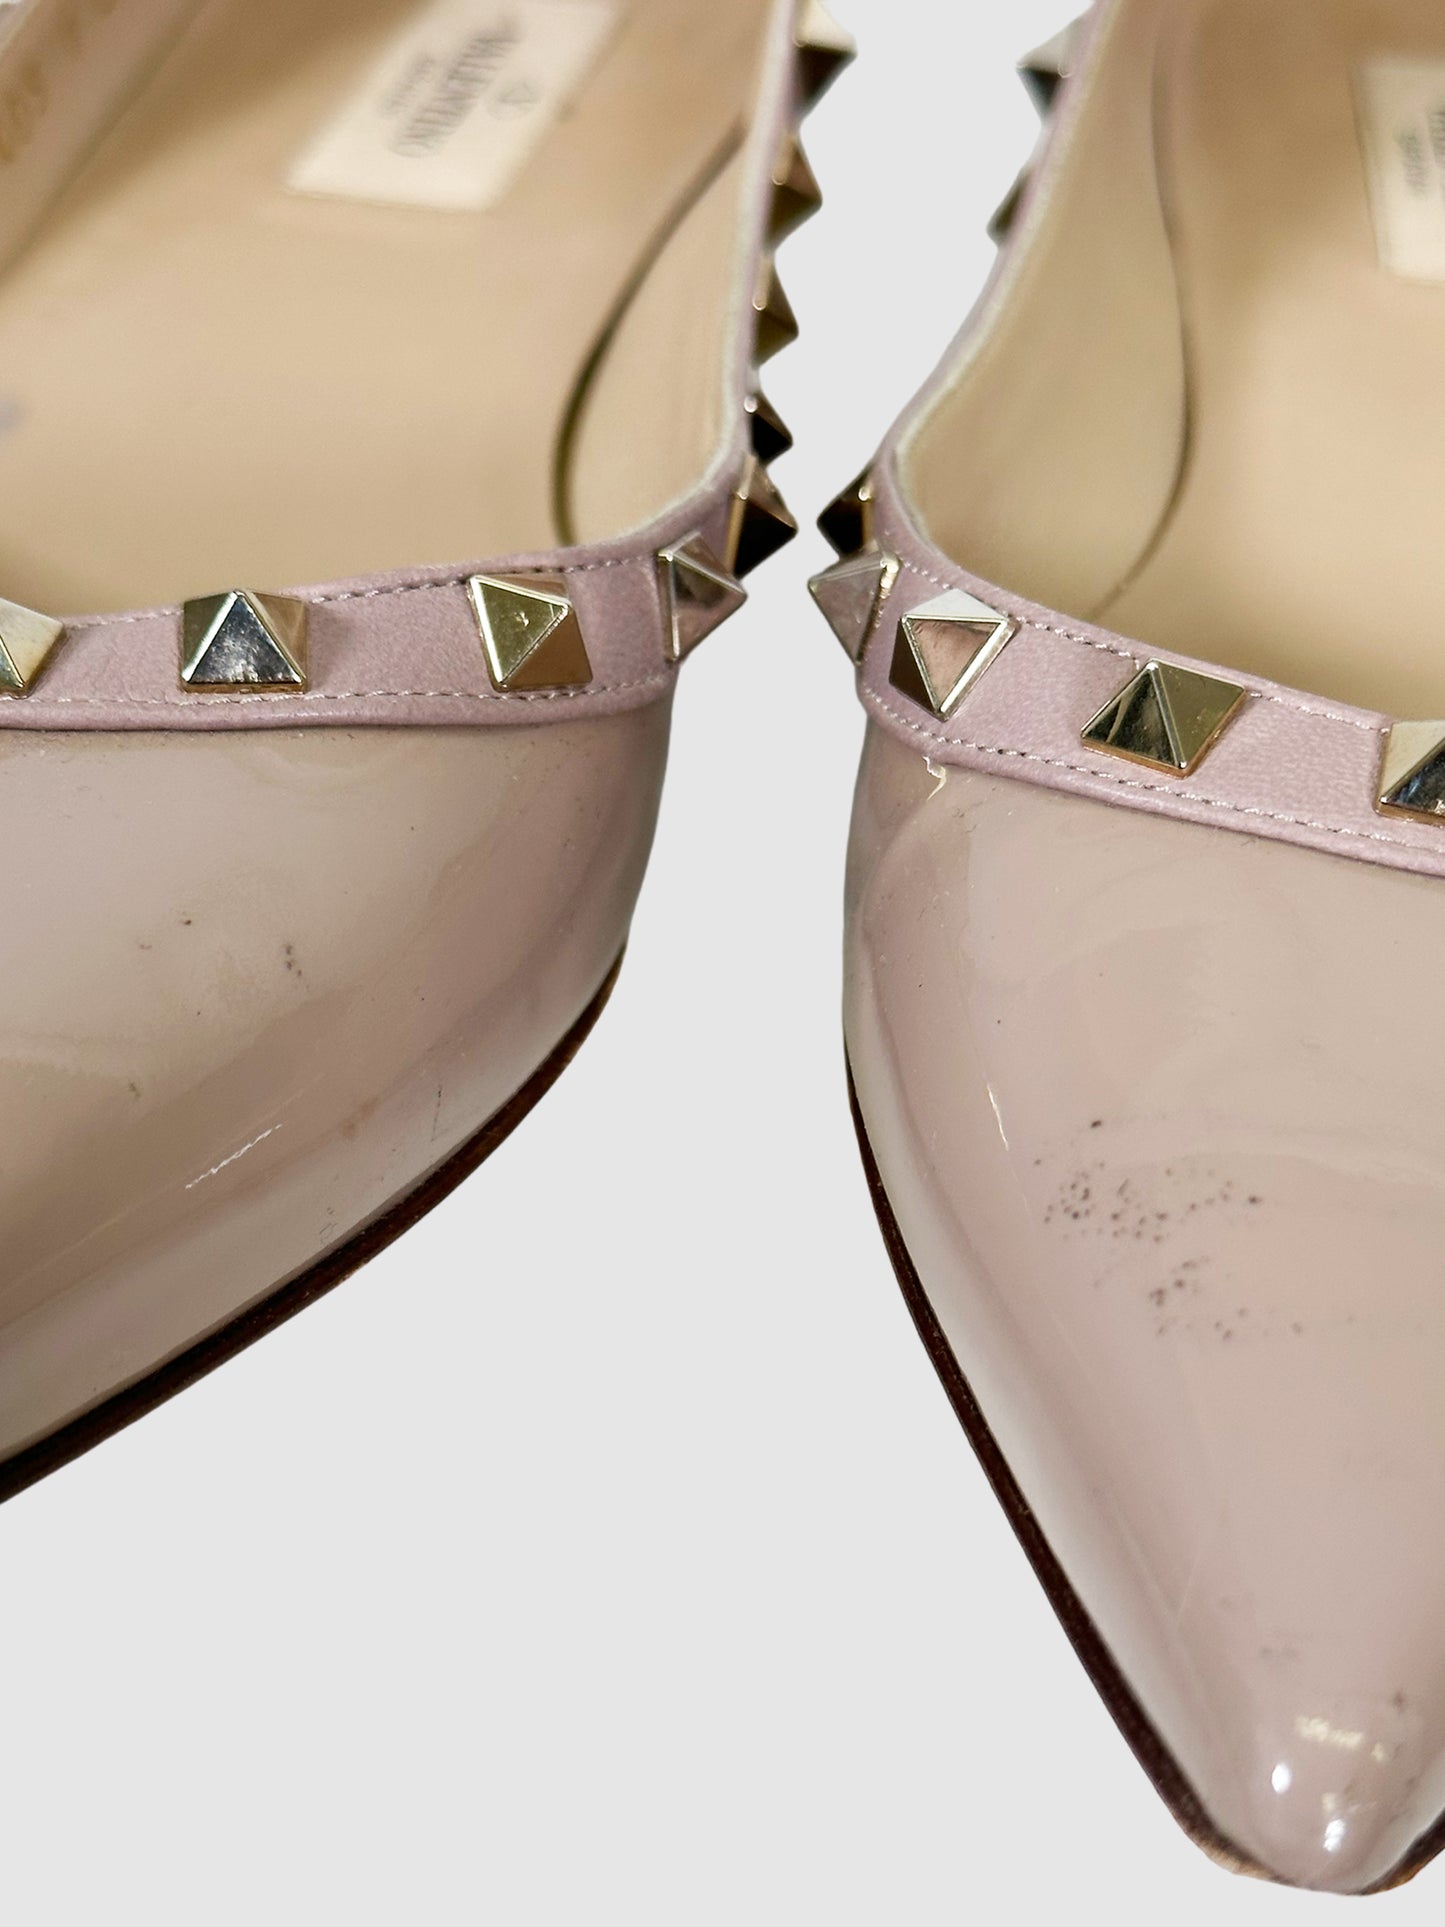 Valentino Rockstud Accents Leather Ballet Flats - Size 39